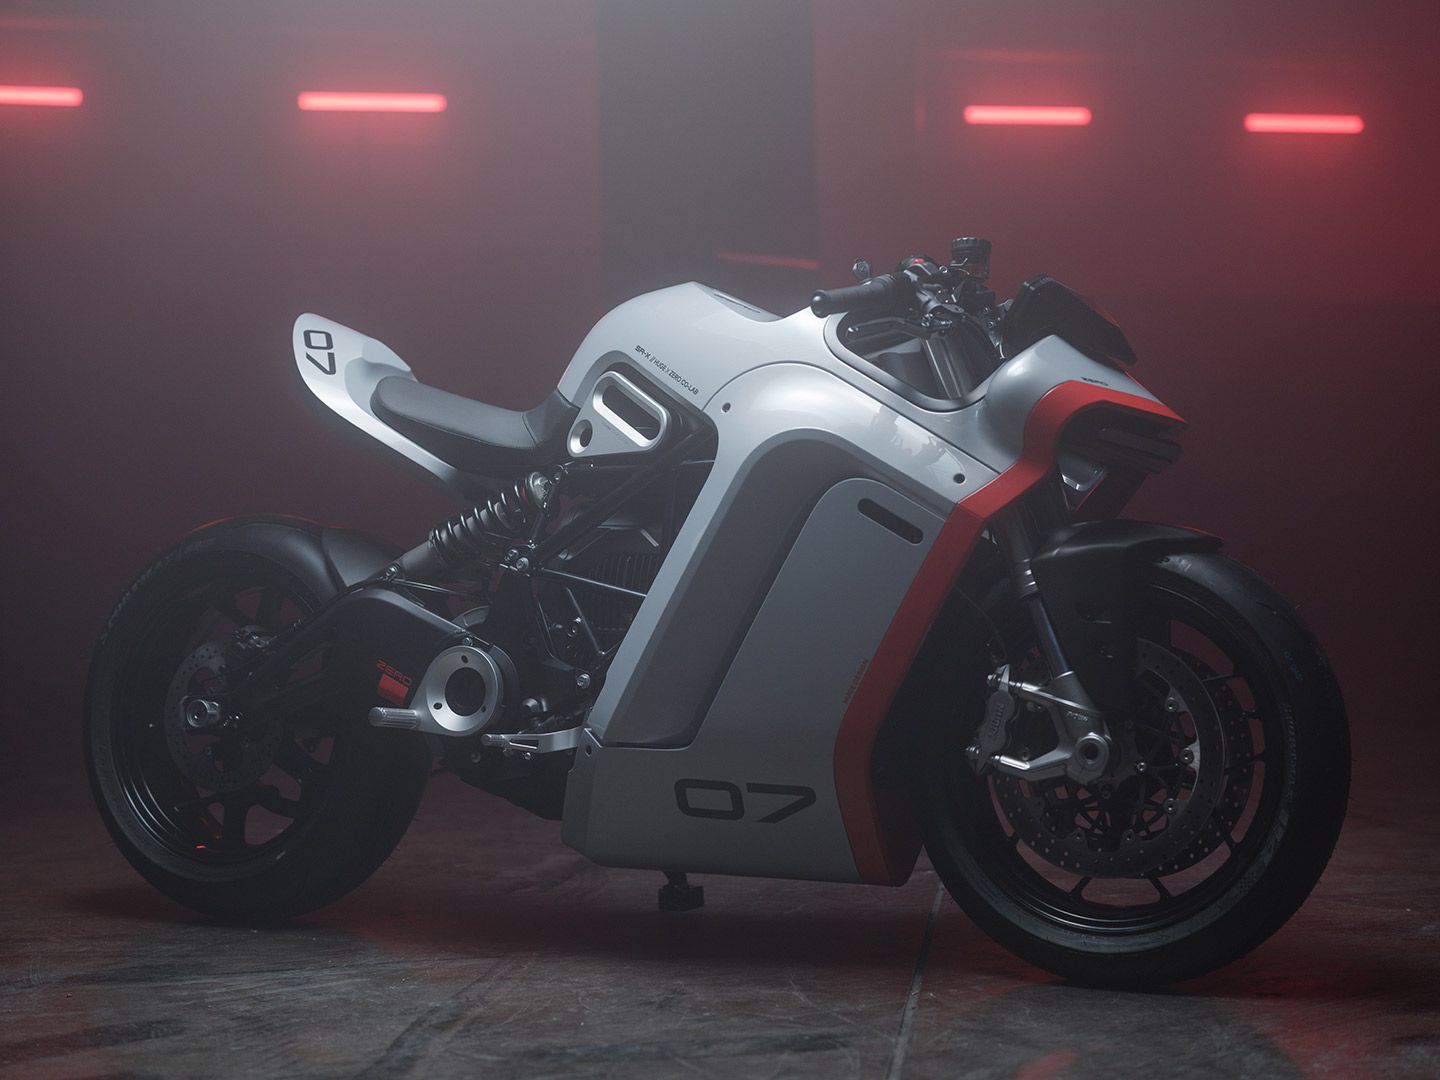 “We can’t wait to see how this concept bike will inspire the future of the industry and continue to push the boundaries of what’s possible,” Zero’s Brian Wismann says.